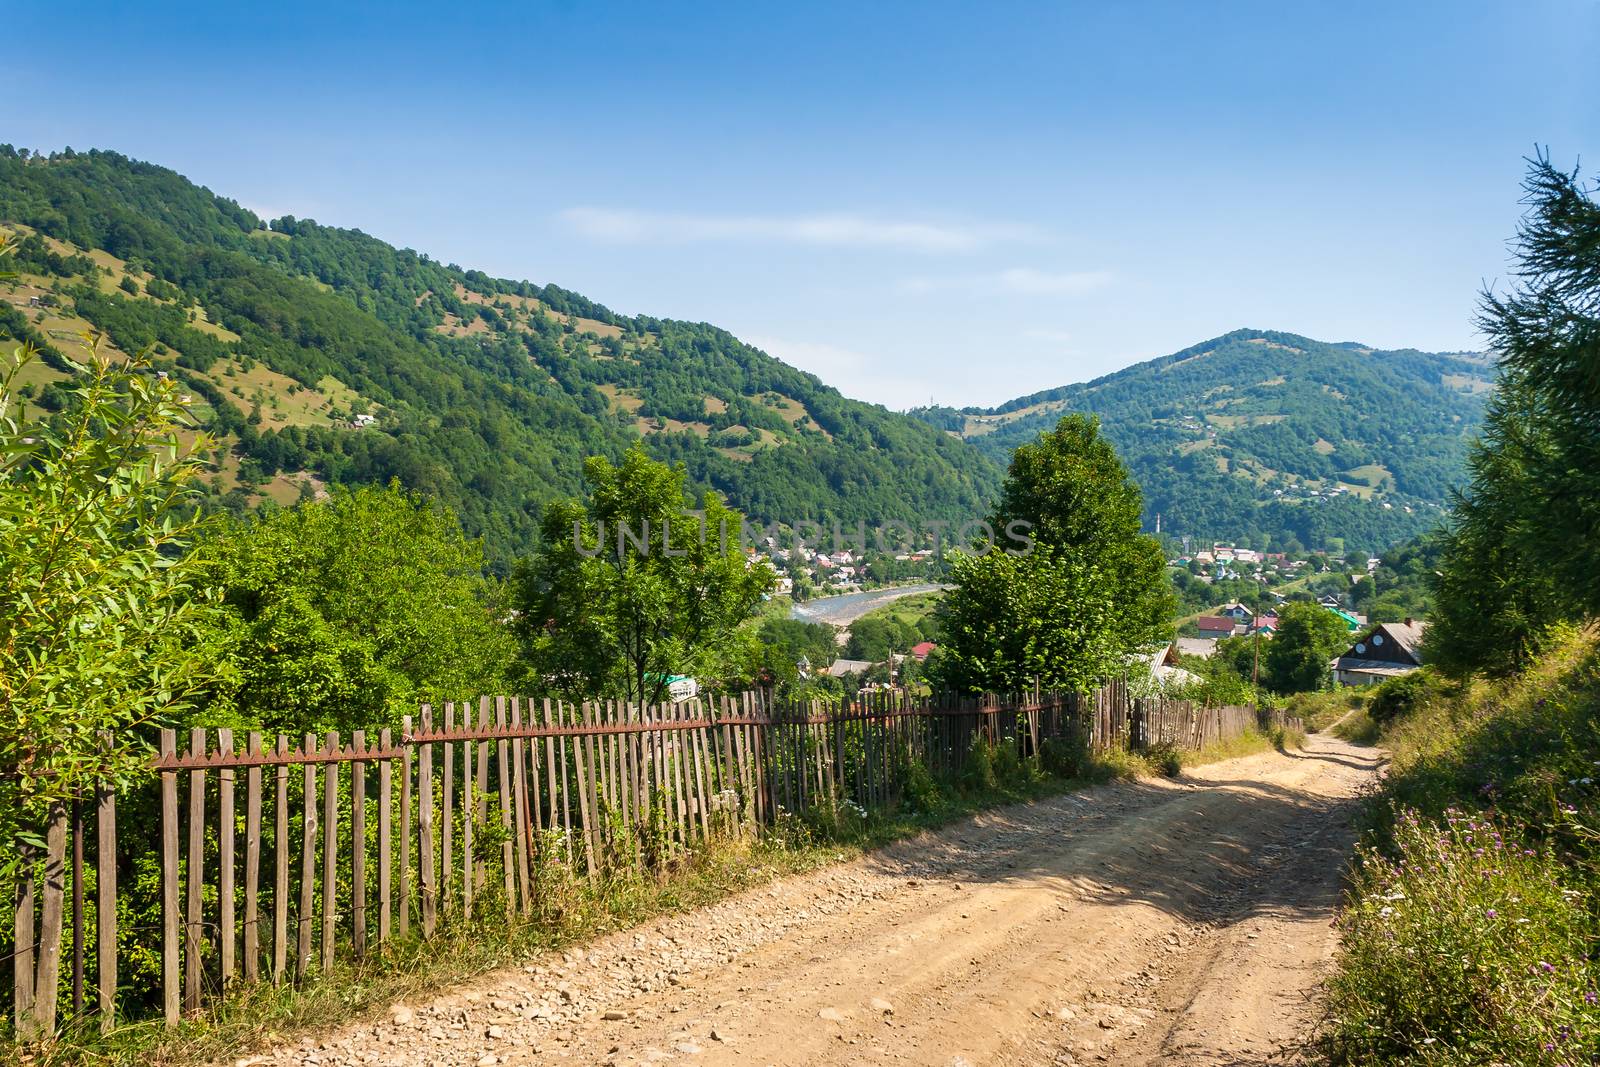 wooden stick fence in vilage in mountains with blue sky, green grass and path in good weather time